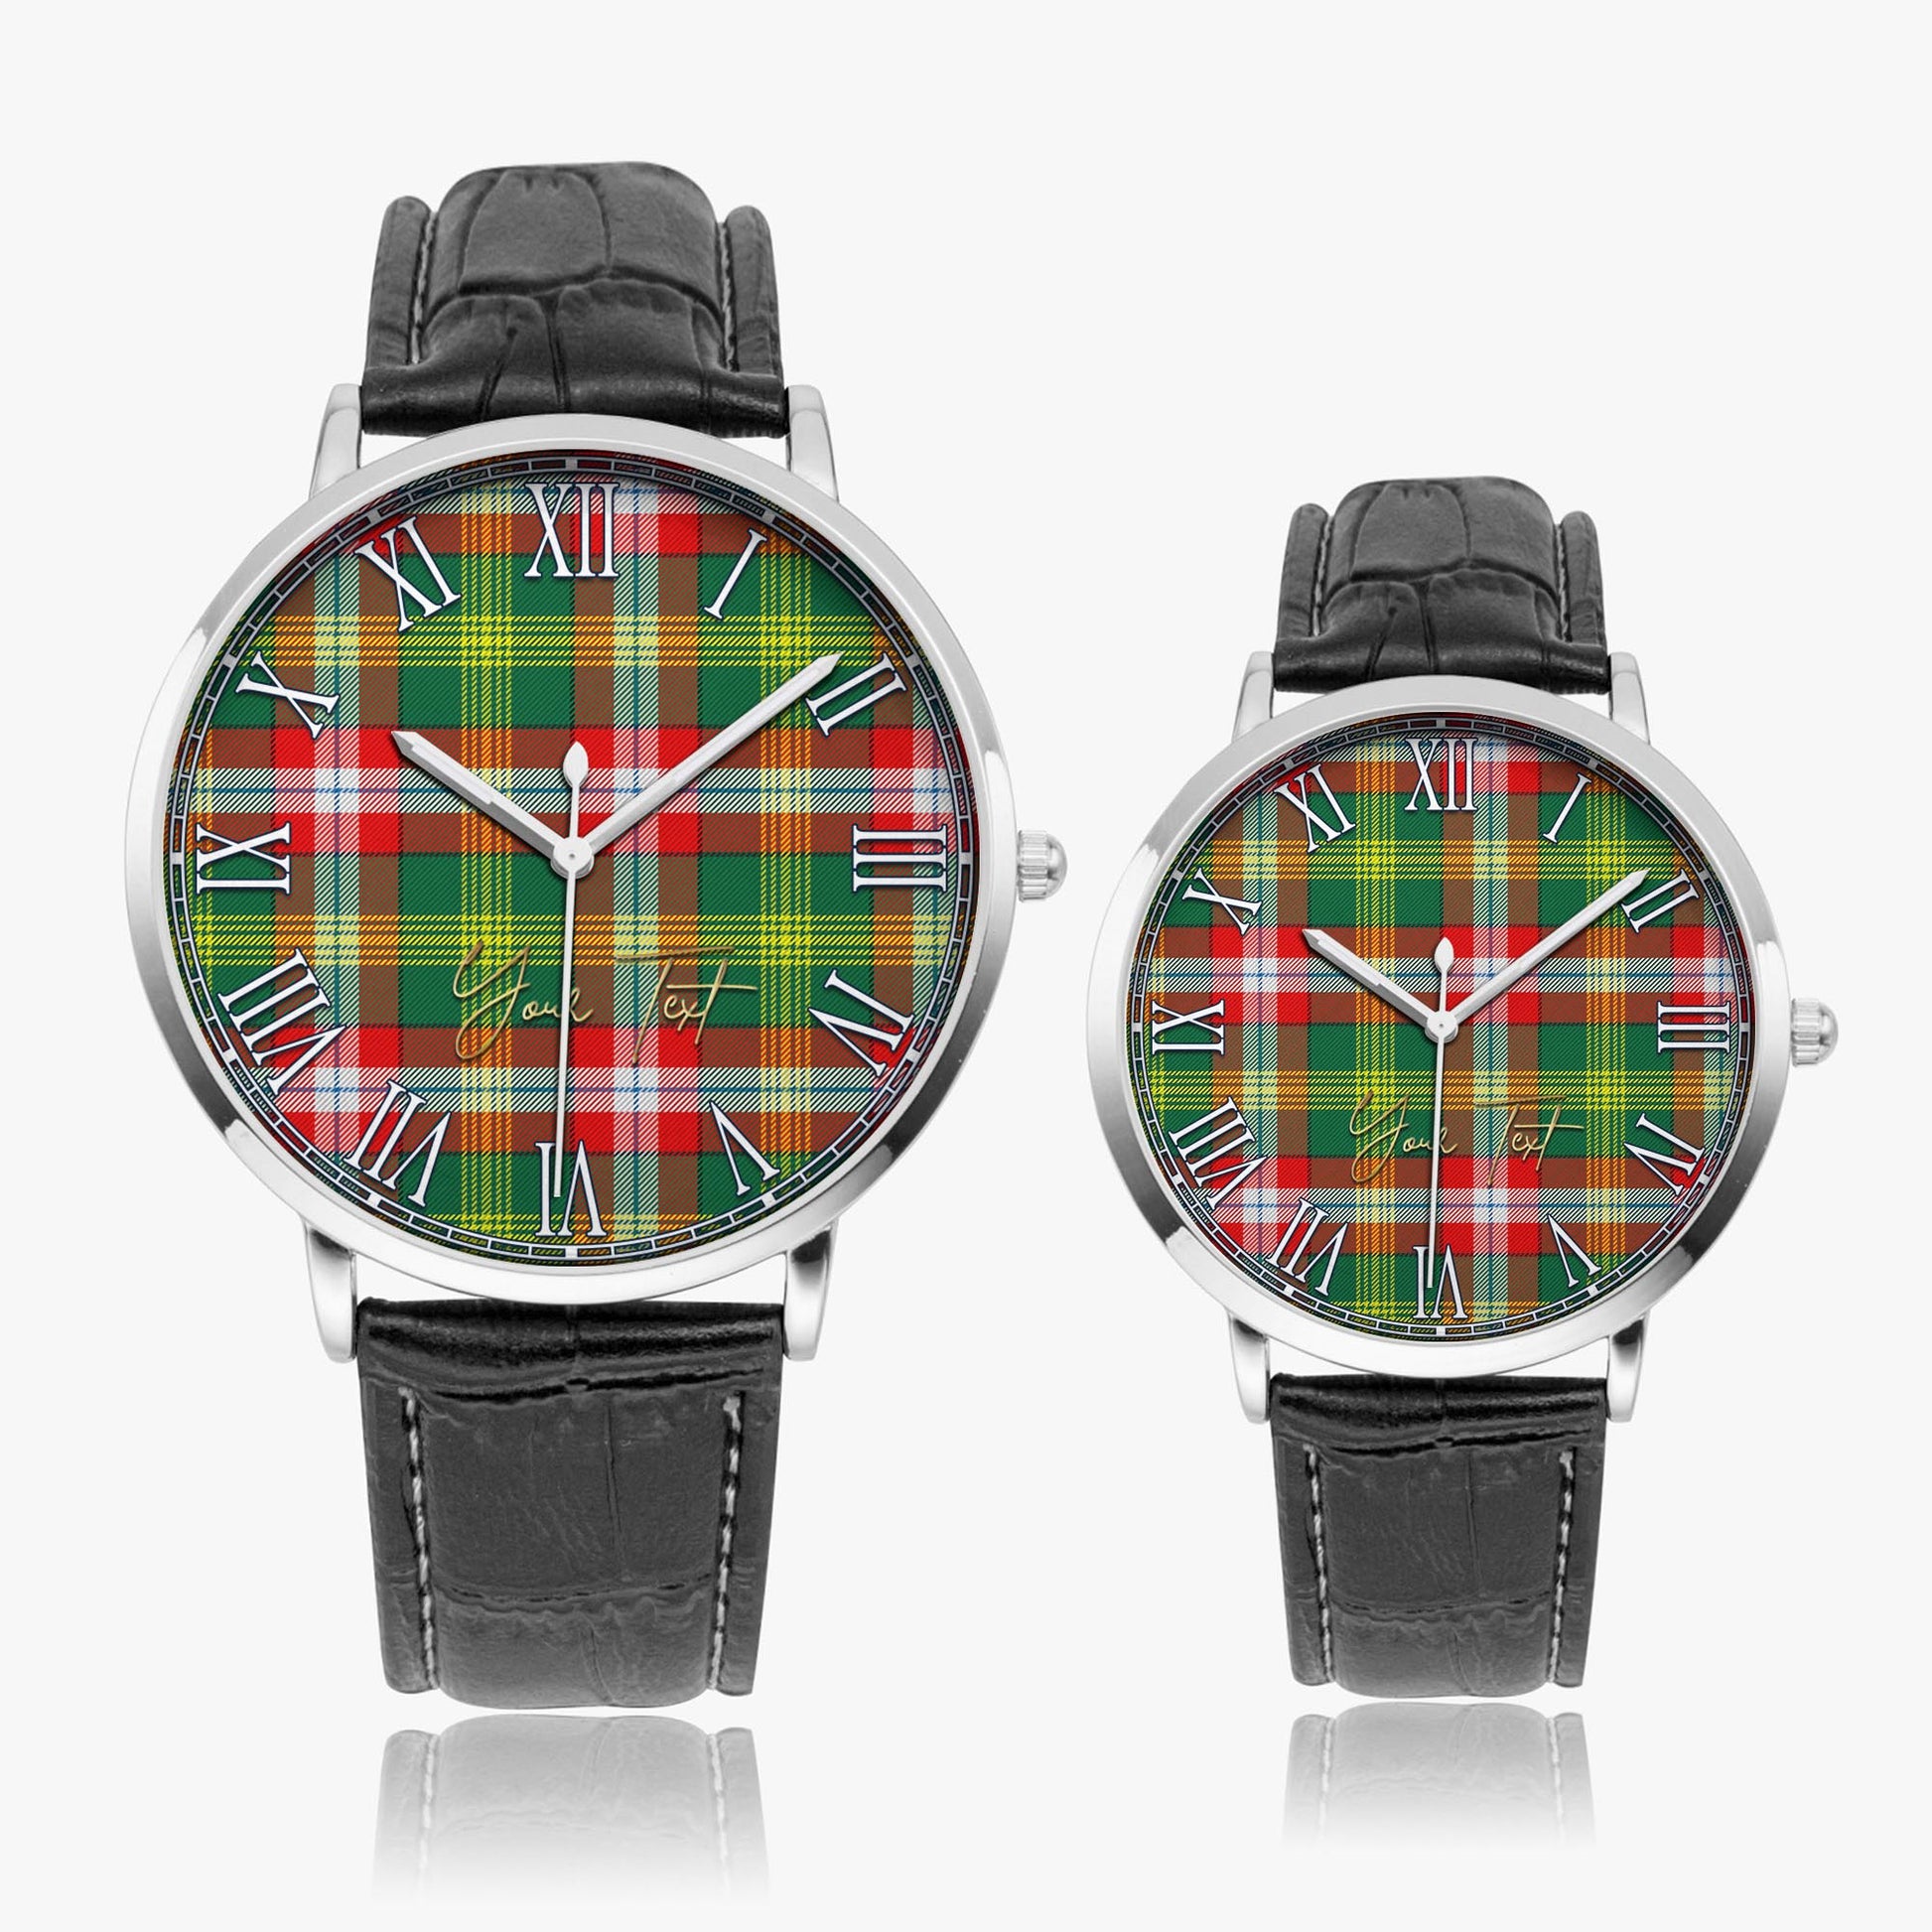 Northwest Territories Canada Tartan Personalized Your Text Leather Trap Quartz Watch Ultra Thin Silver Case With Black Leather Strap - Tartanvibesclothing